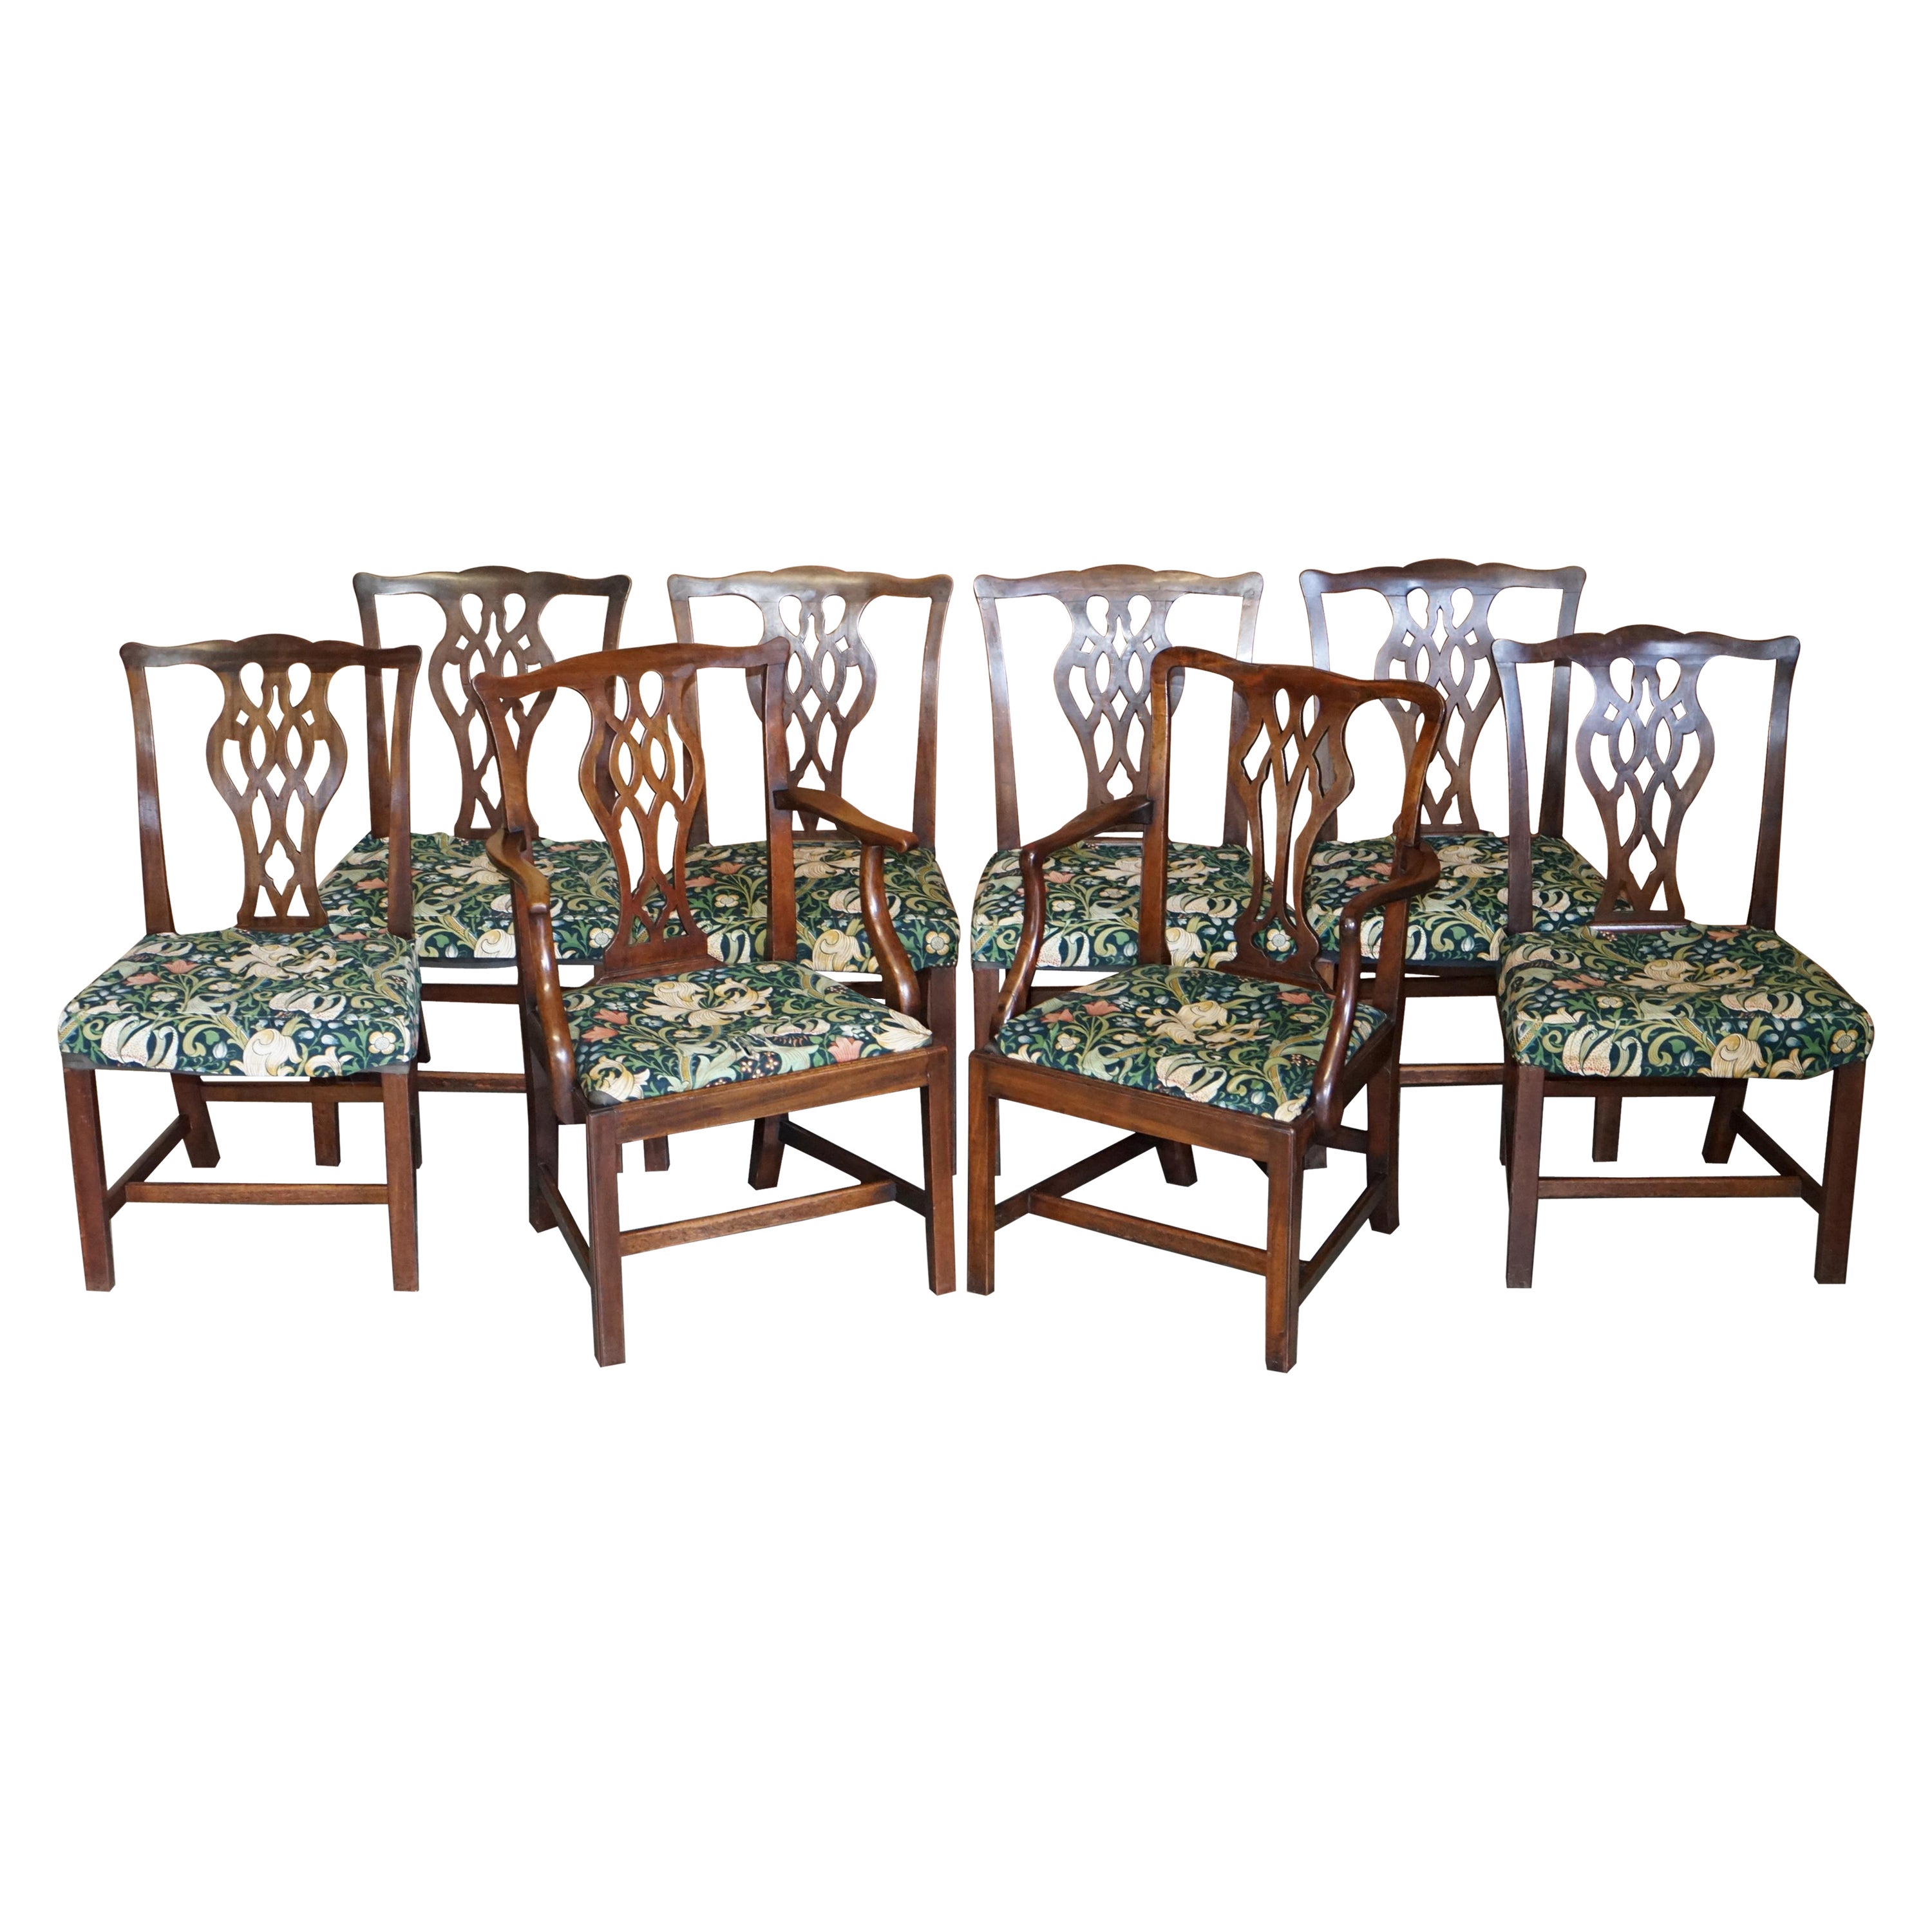 8 Antique George III circa 1830 Thomas Chippendale Dining Chairs William Morris For Sale